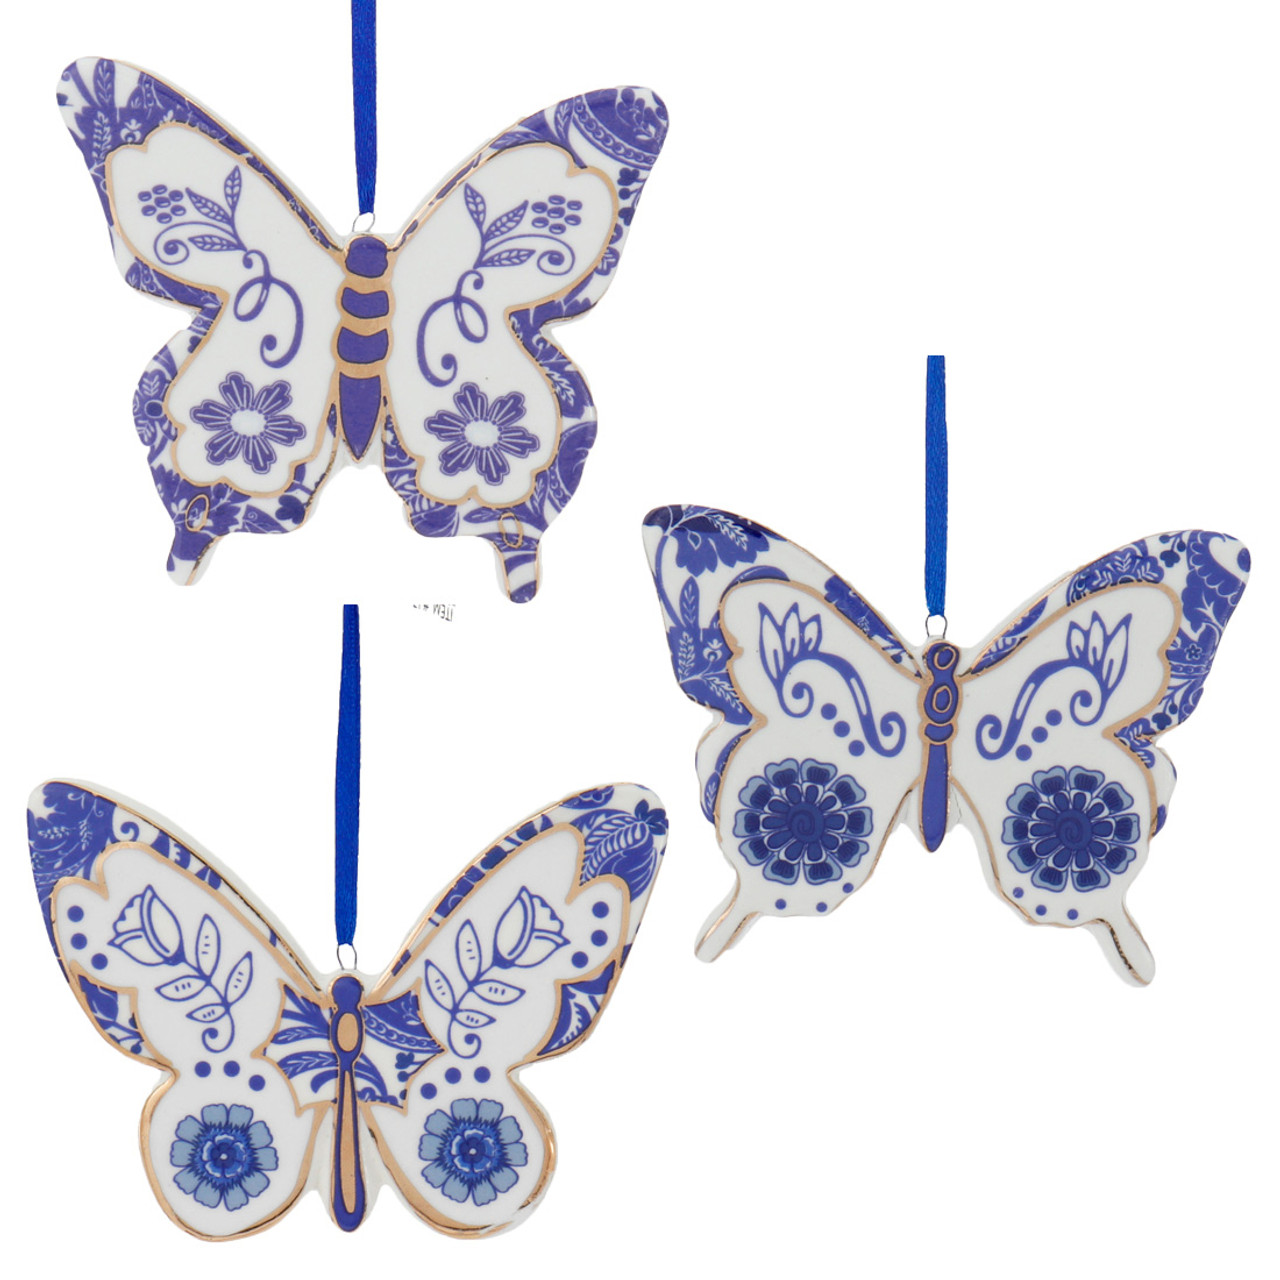 Indigo Blue and White Butterfly Porcelain Ornament 4